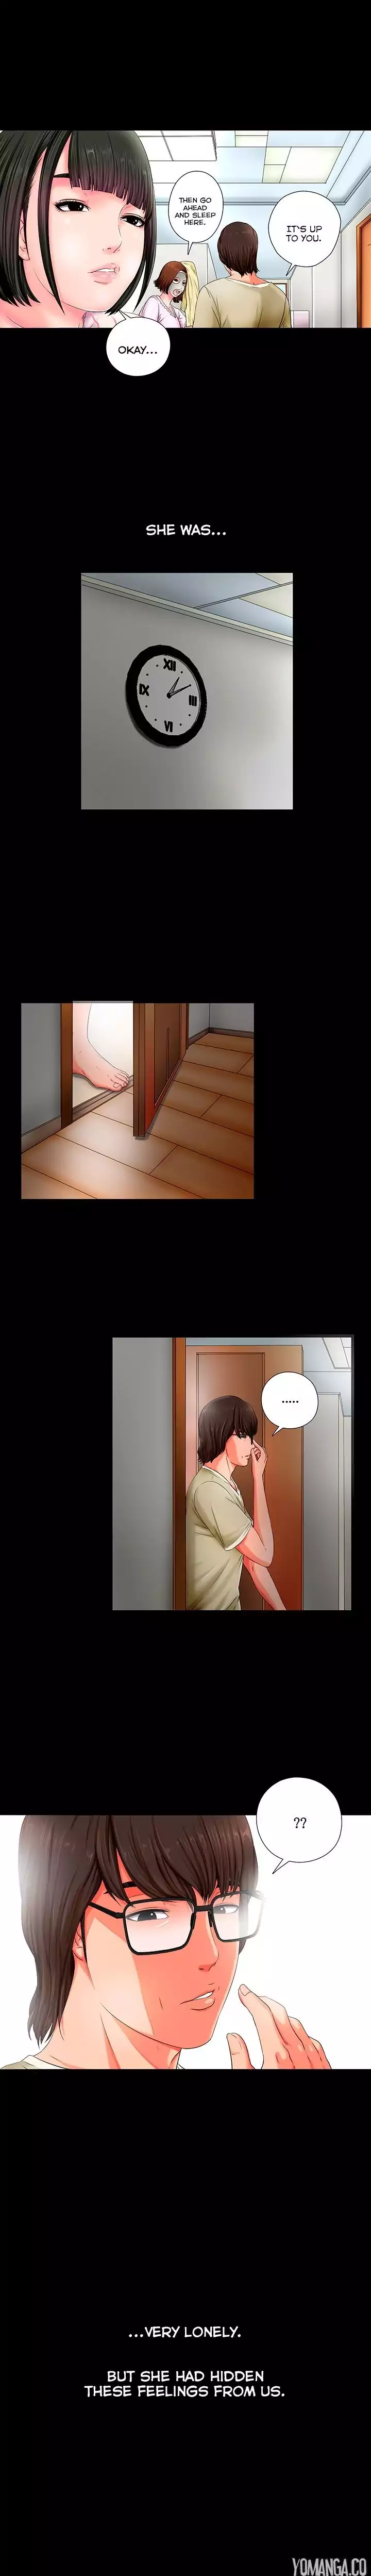 The Girl Next Door - Chapter 1 Page 8